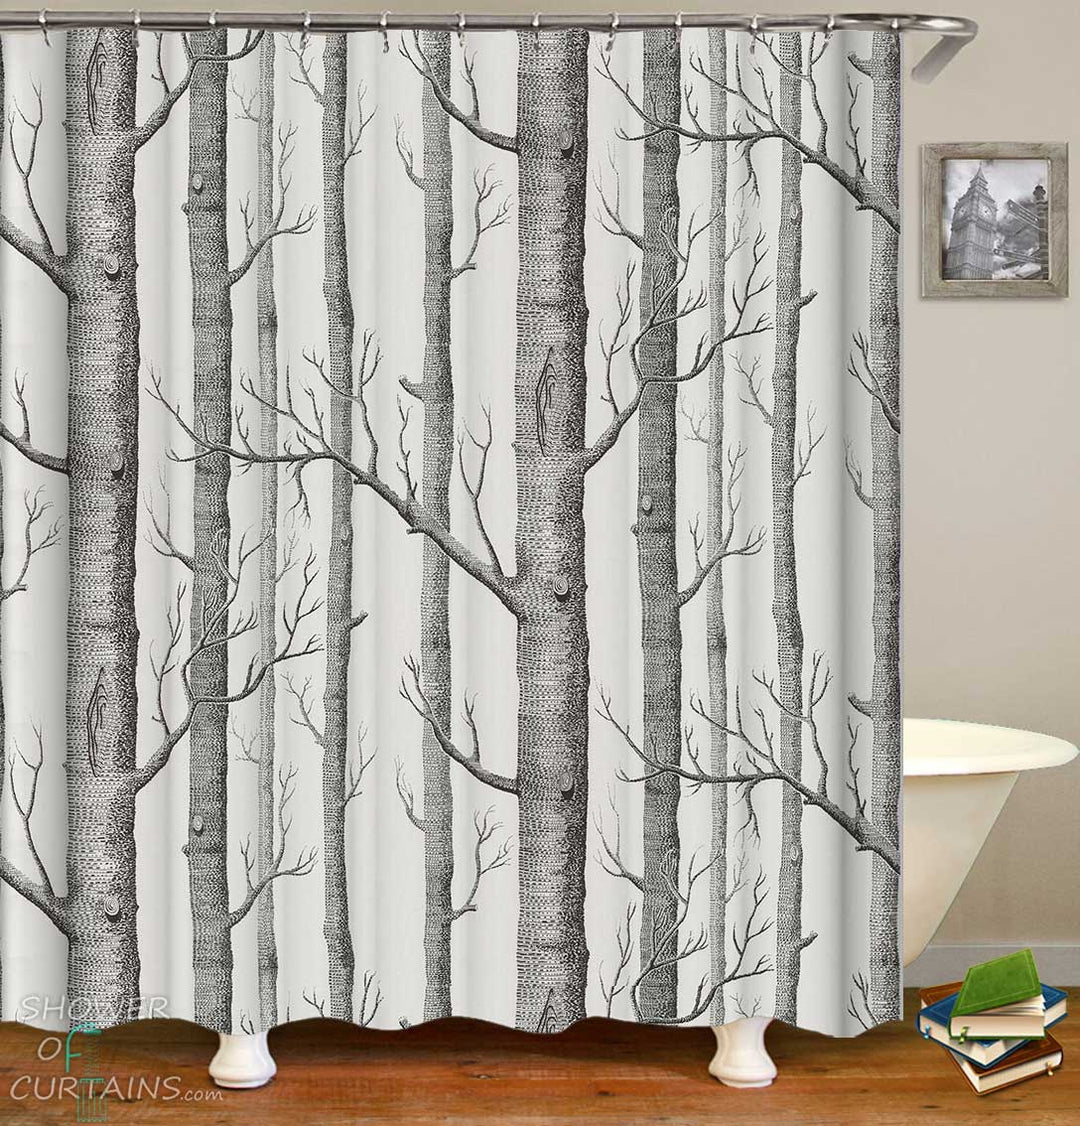 Shower Curtains with Grey Tree Trunks